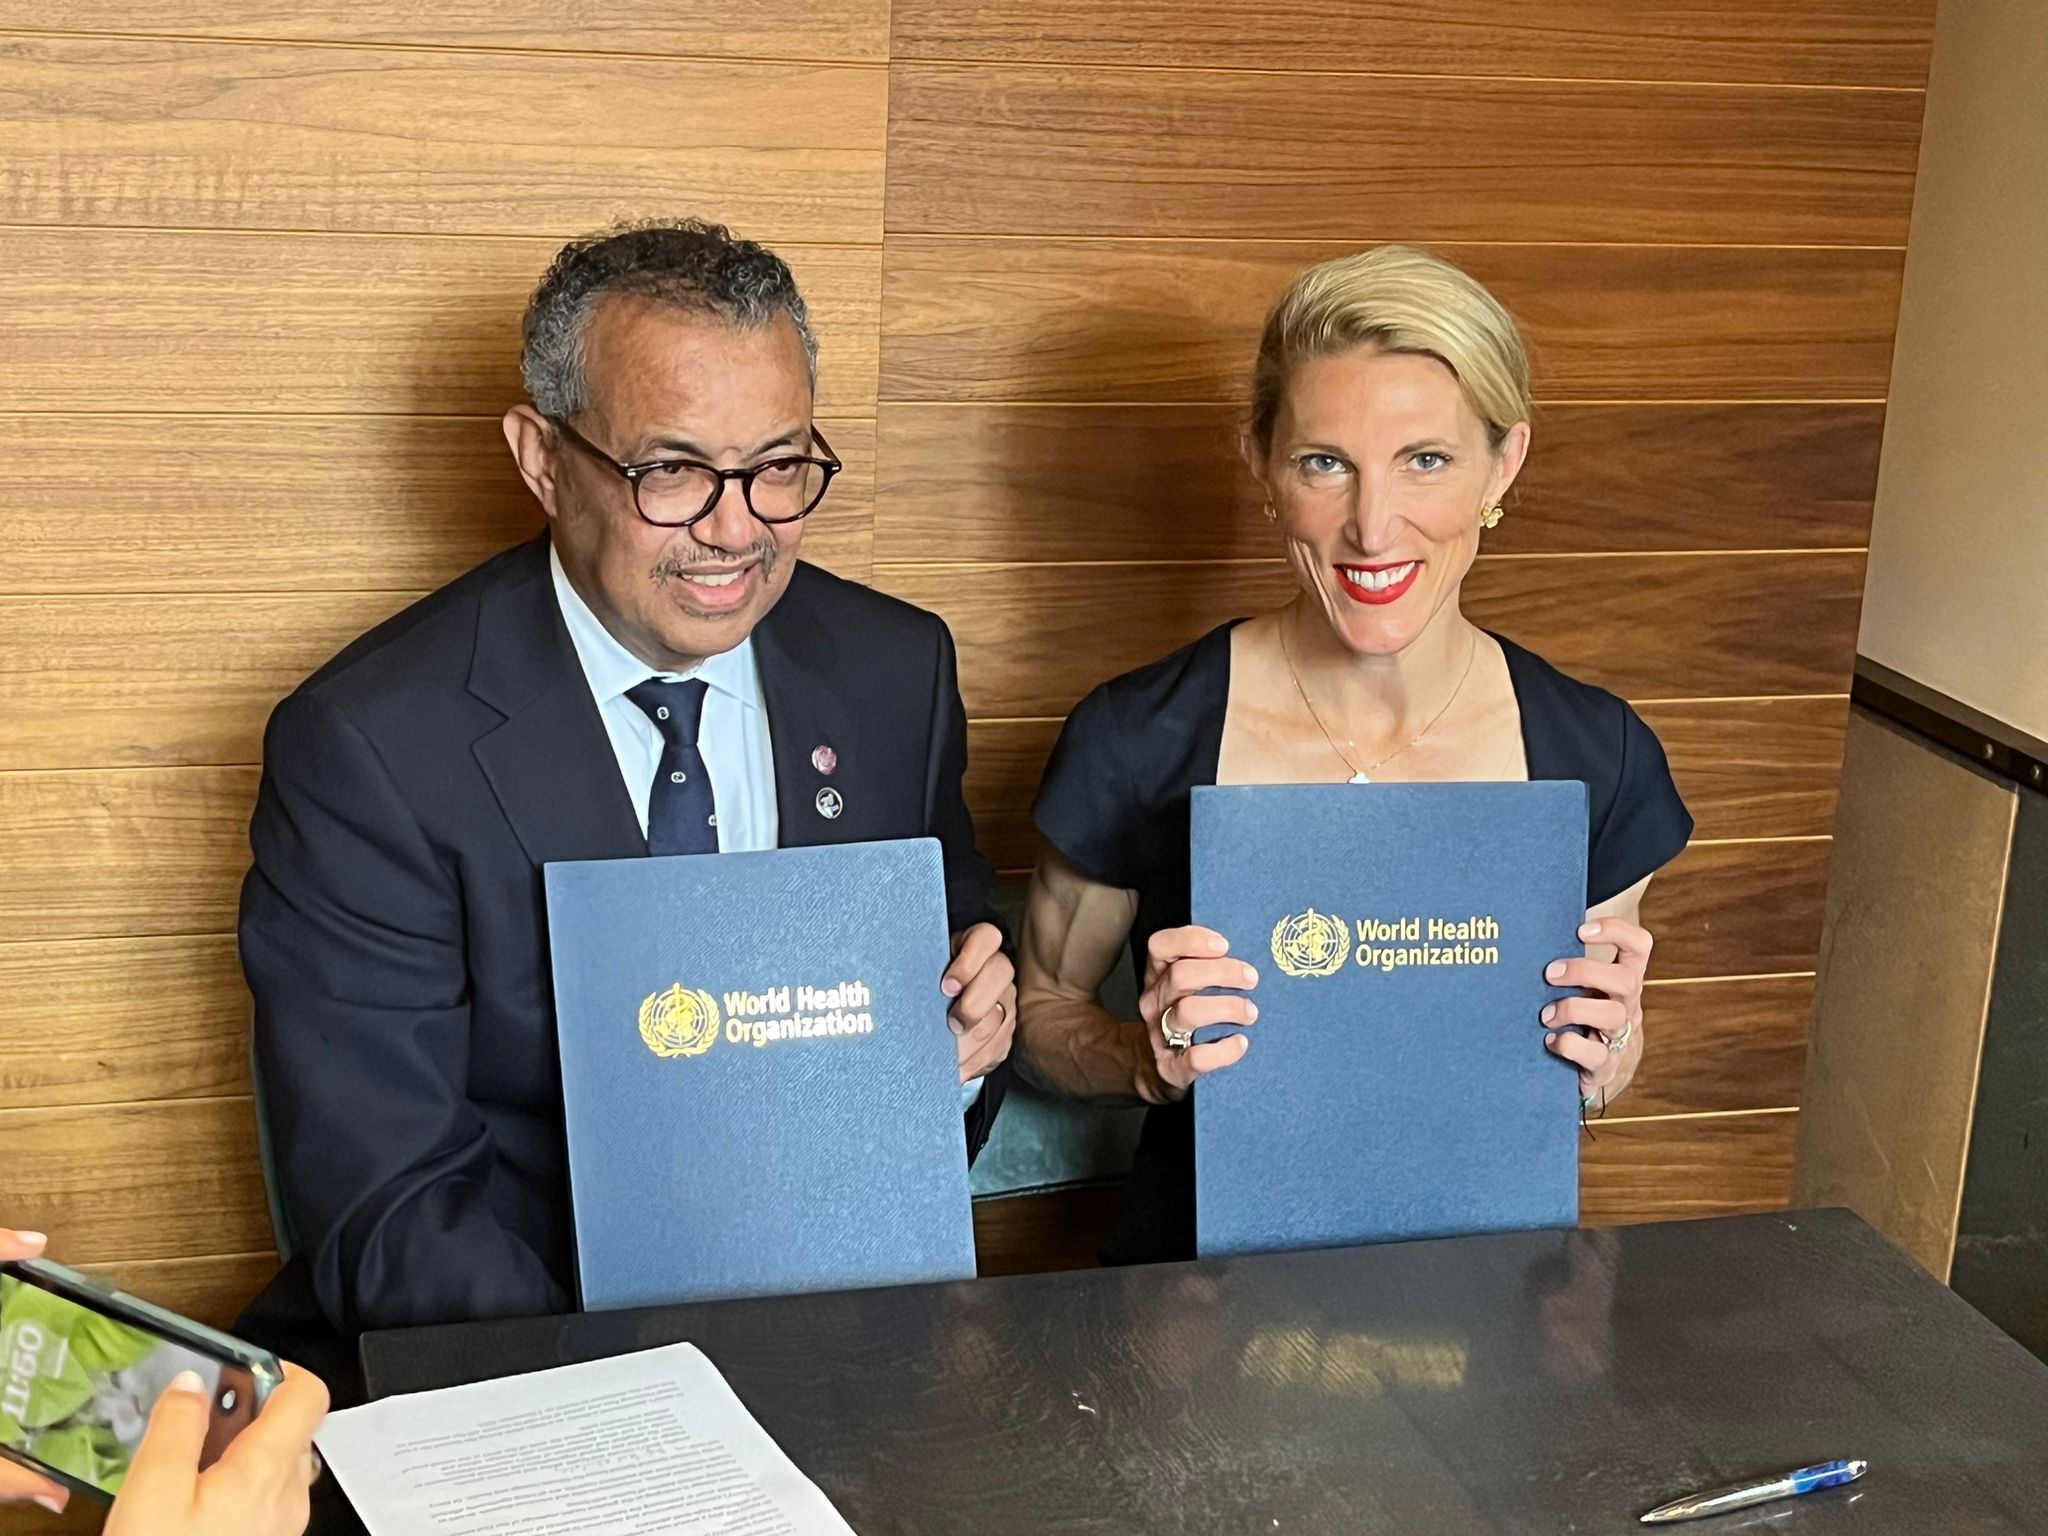 Vanessa Kerry, World Health Organization's newly appointed special envoy for Climate Change and Health, right, with WHO Director-General Tedros Ghebreyesus. [WHO]